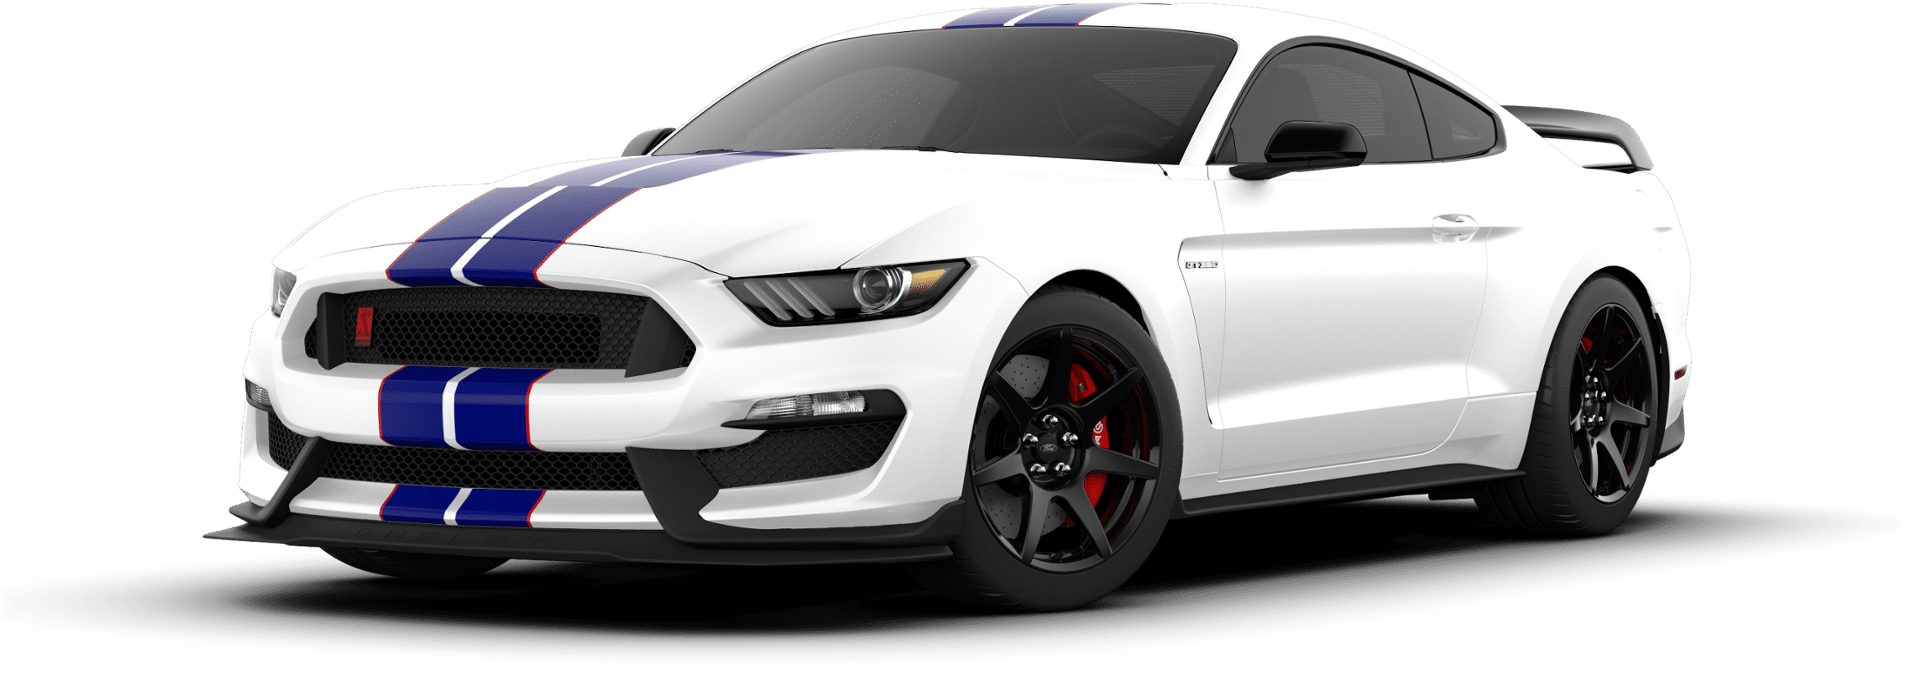 Ford Mustang 2018 PNG Background